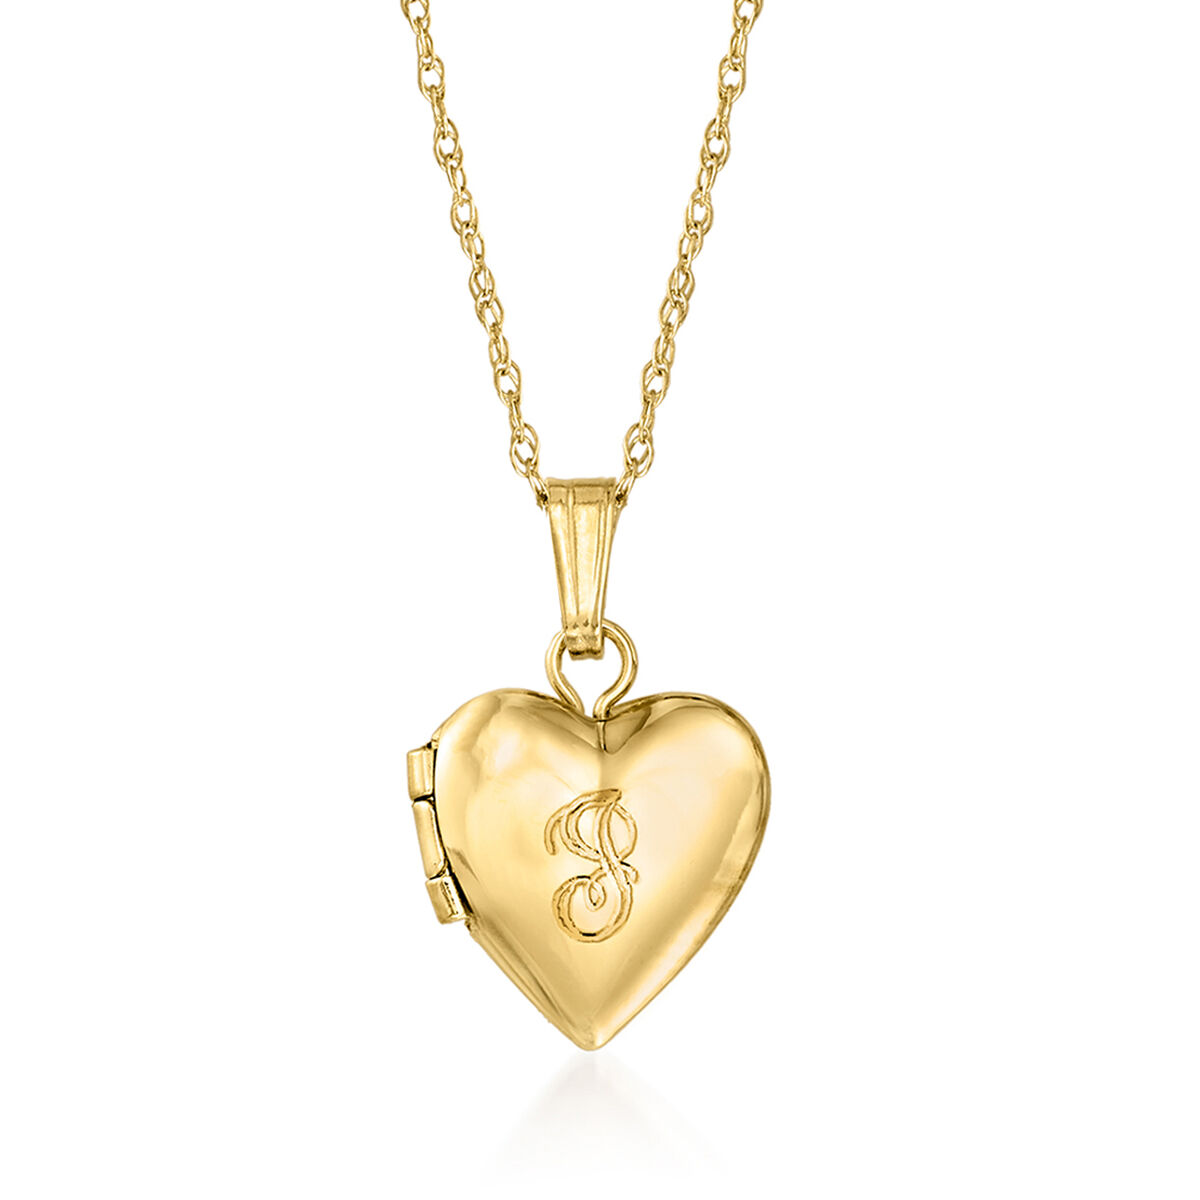 Ross-Simons - Single-Initial - Baby's 14kt Yellow Gold Heart Locket Necklace. Size 13